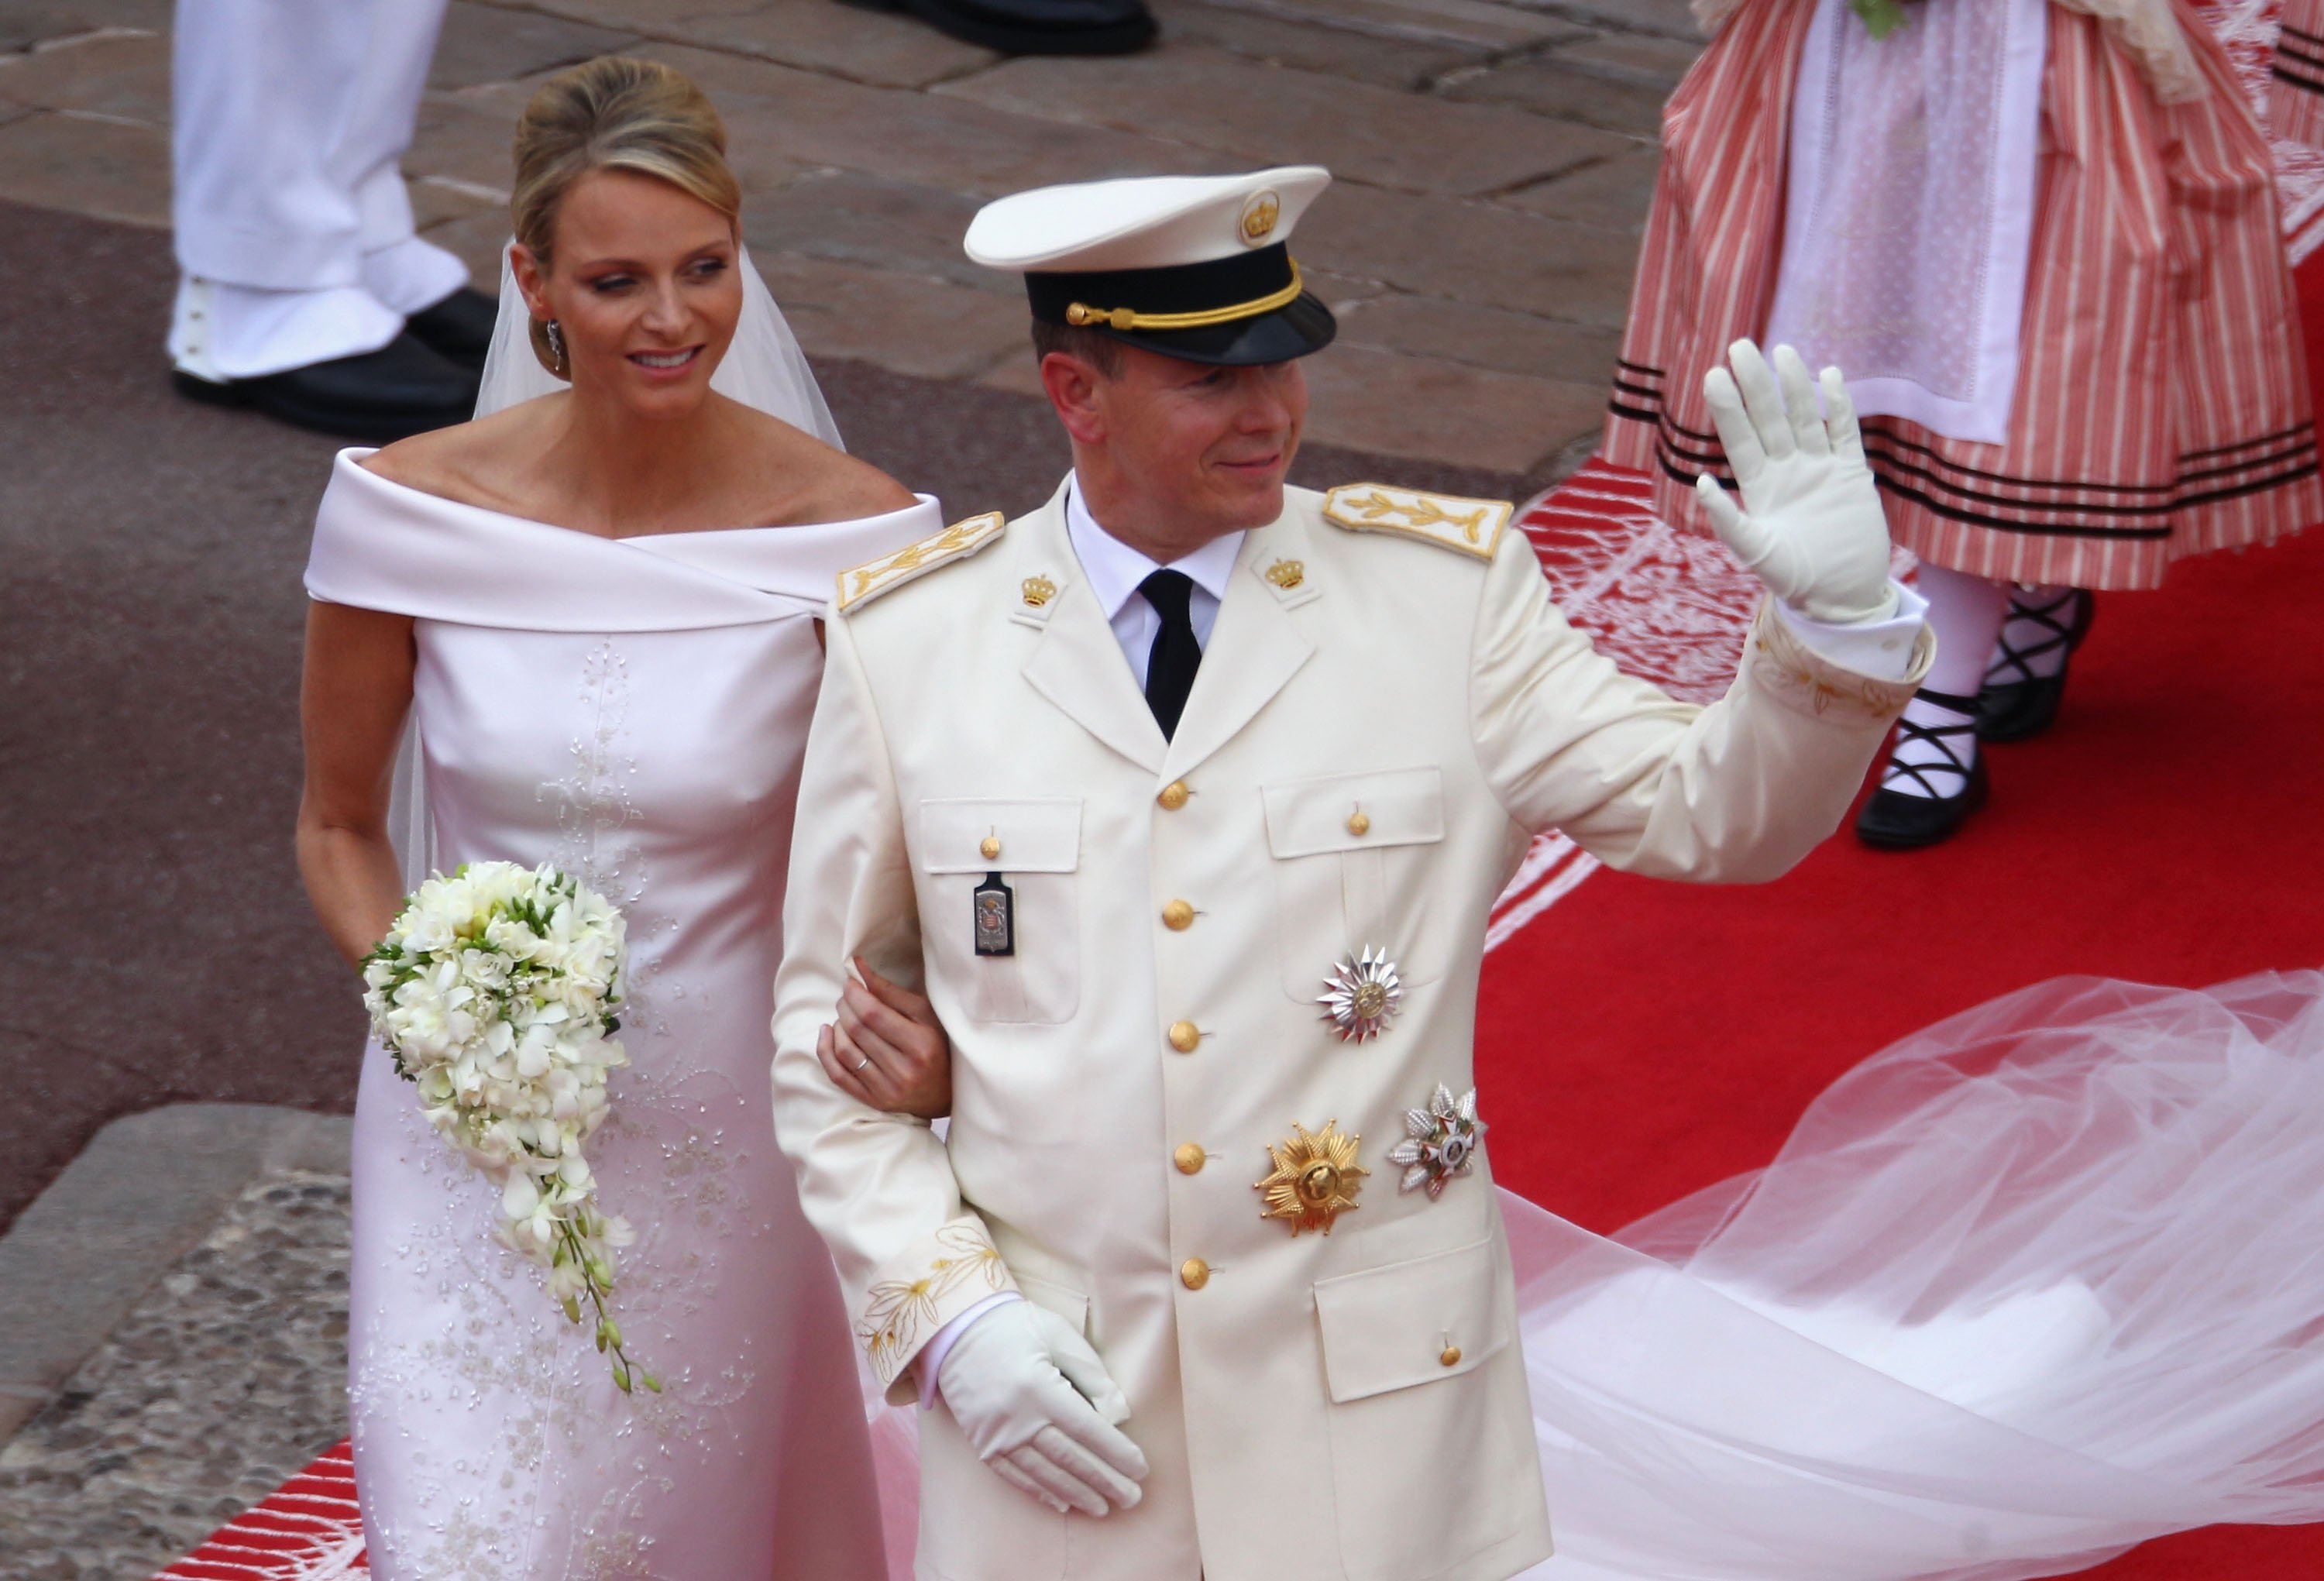 Princess Charlene and Prince Albert II of Monaco on their wedding day, July, 2011 | Photo: Getty Images.